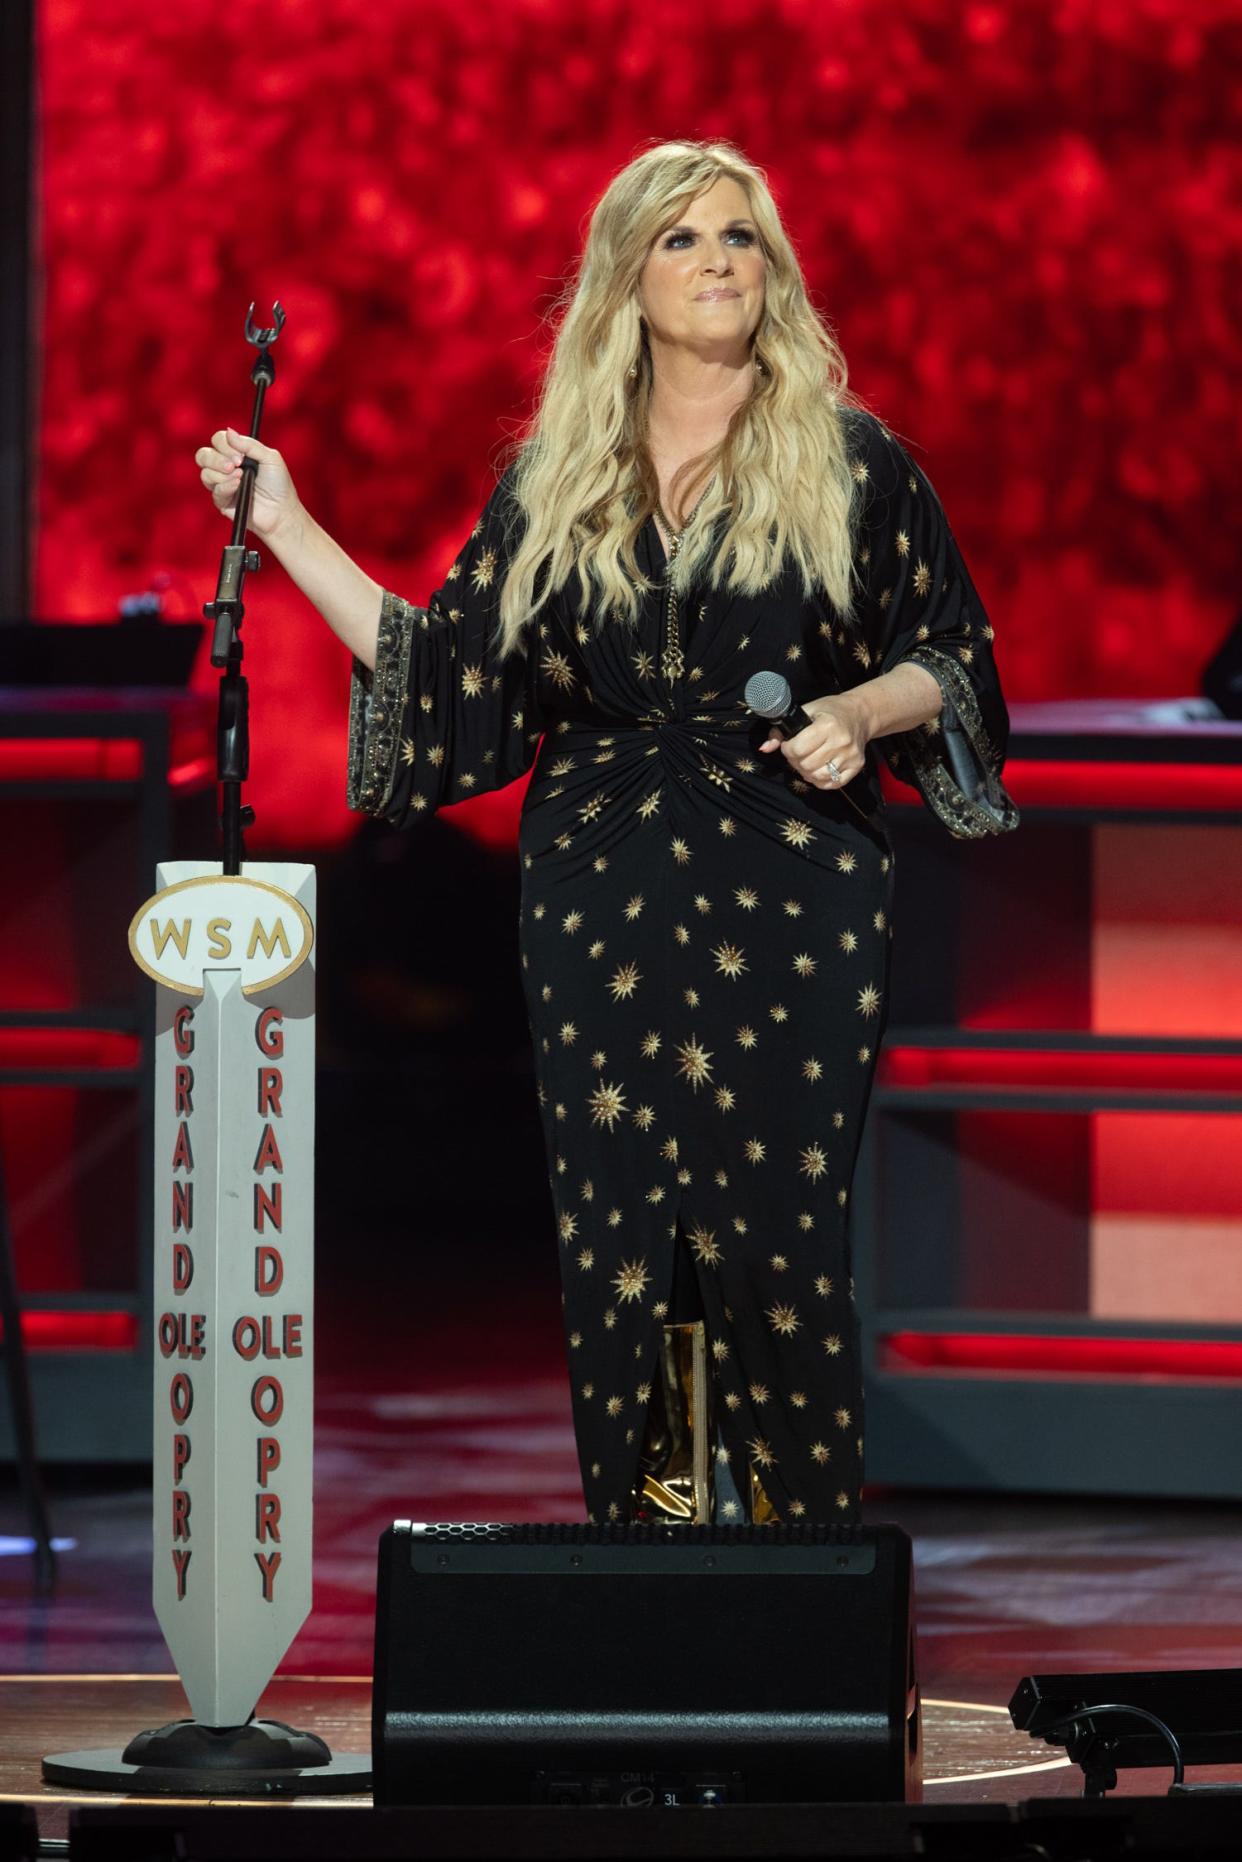 Trisha Yearwood celebrates her 25th anniversary as a Grand Ole Opry member at a show Wednesday.